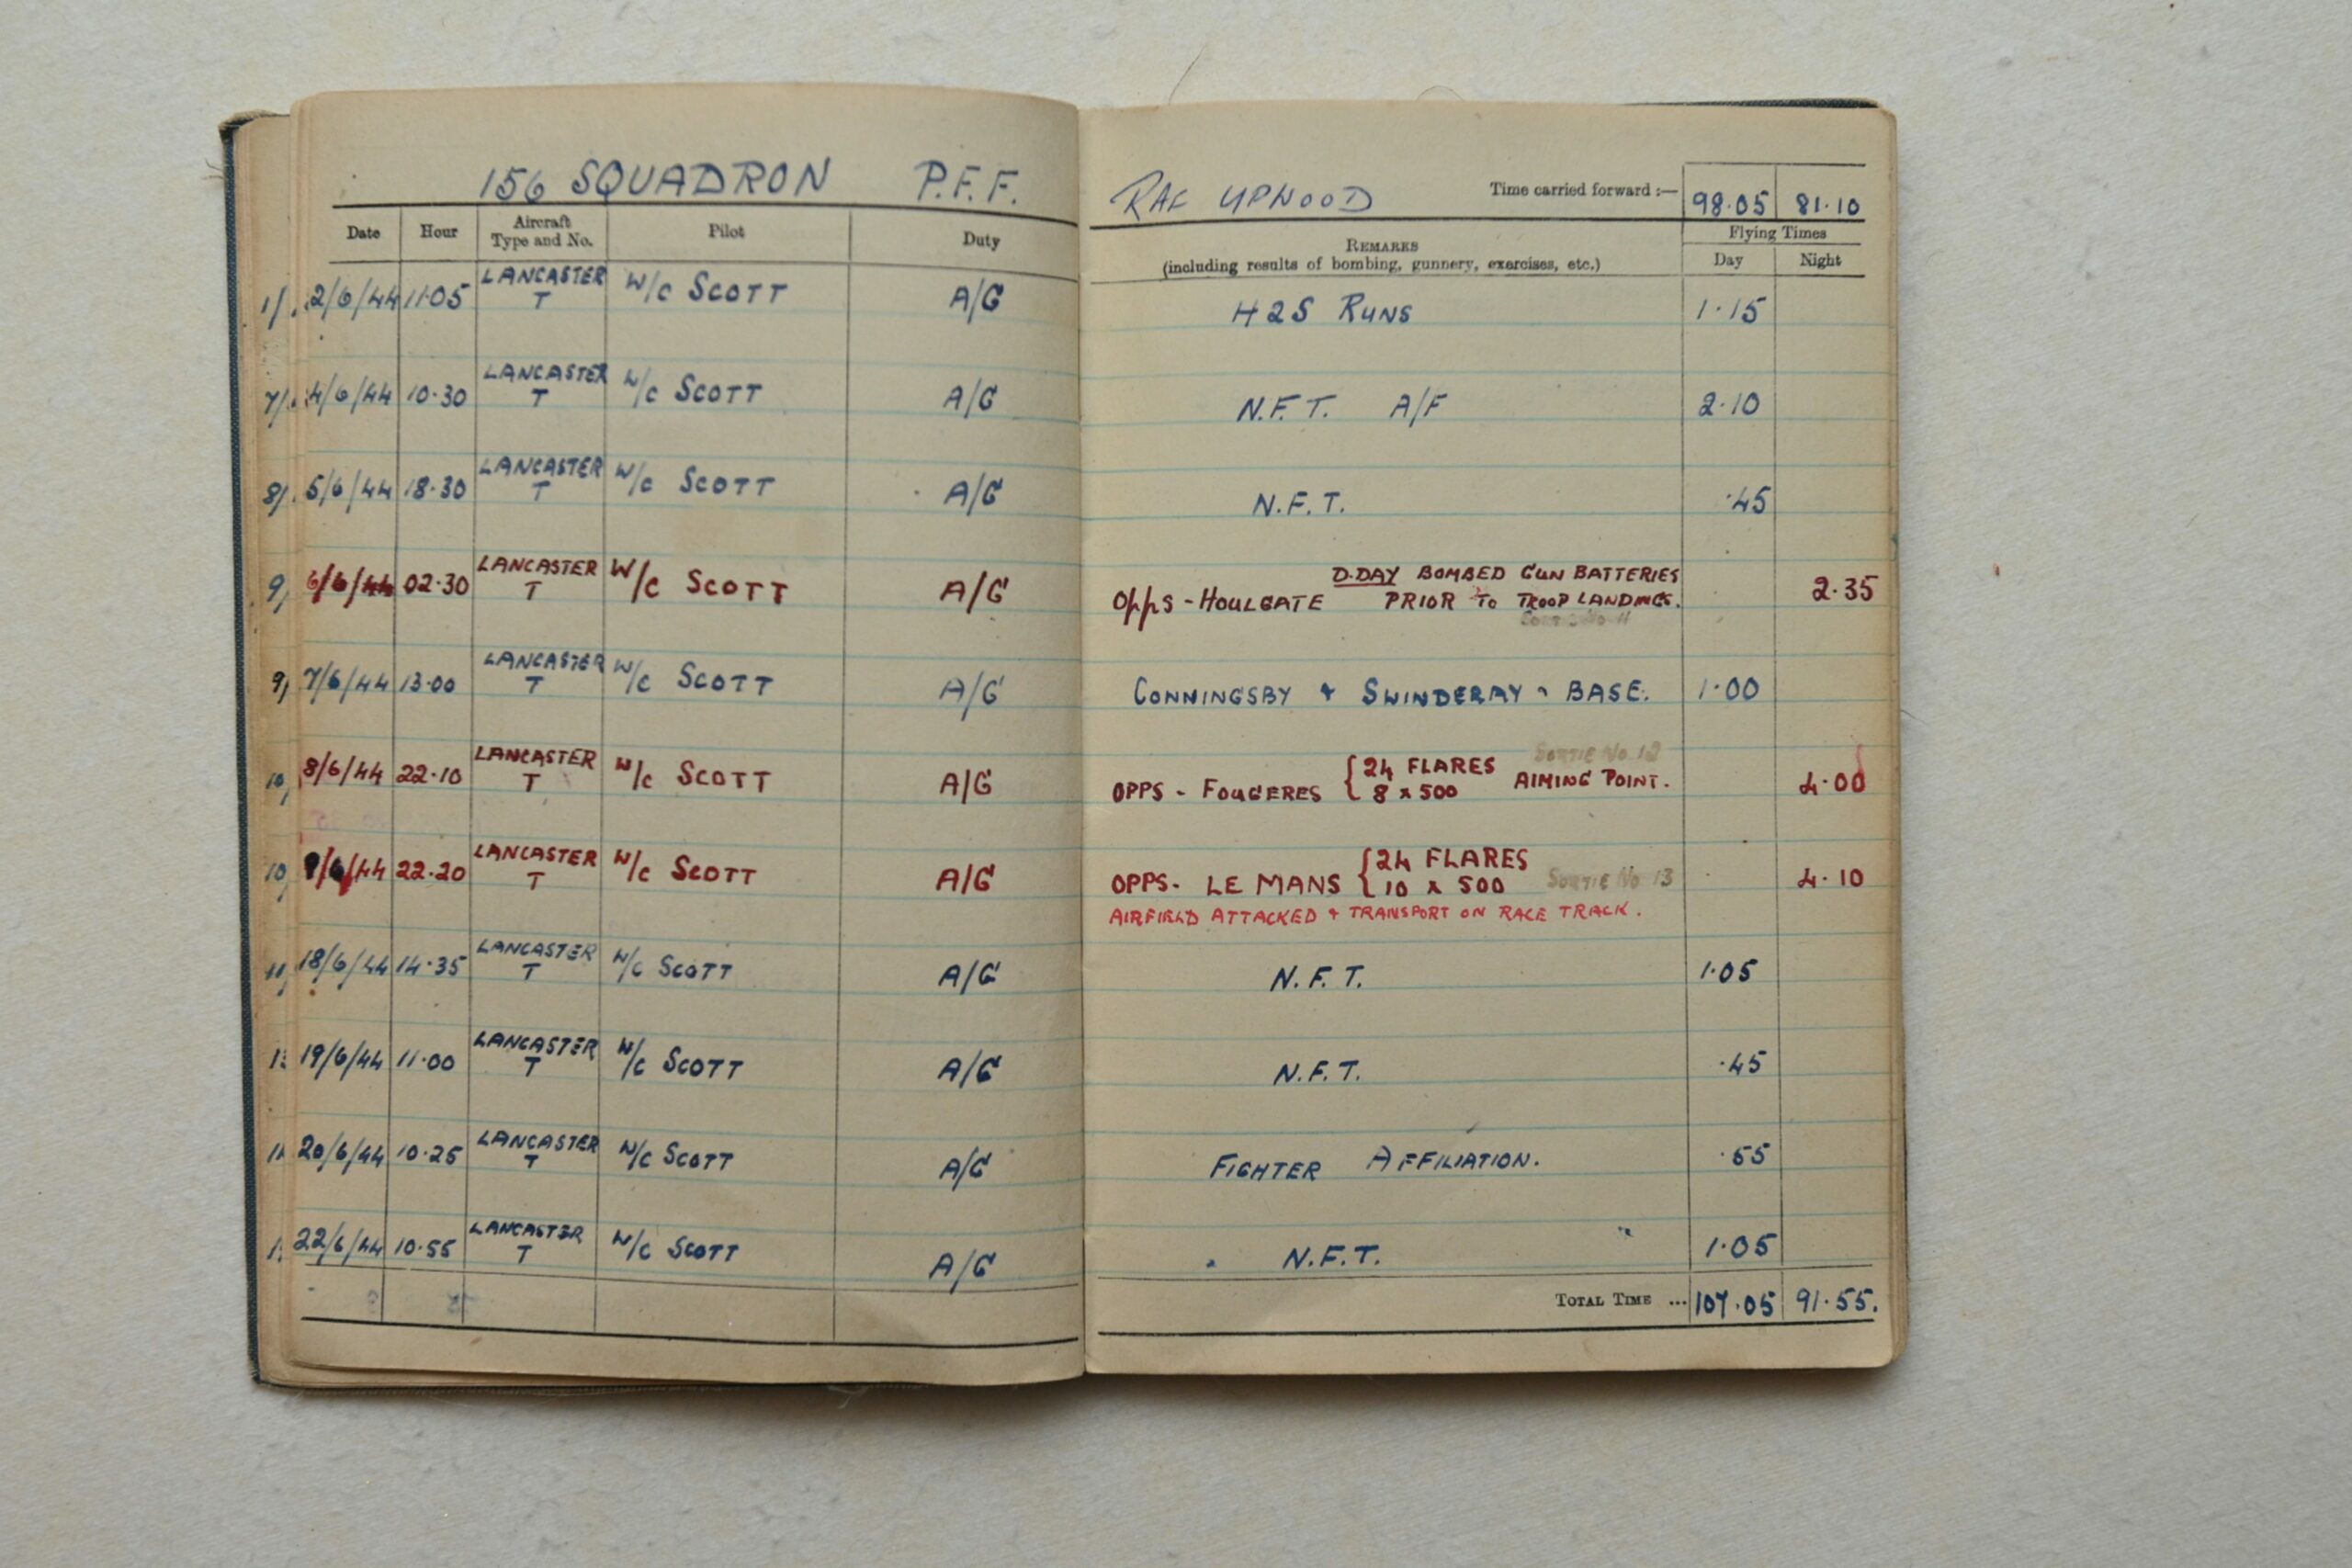 This page from Bill's log book shows his Houlgate mission on D-Day.